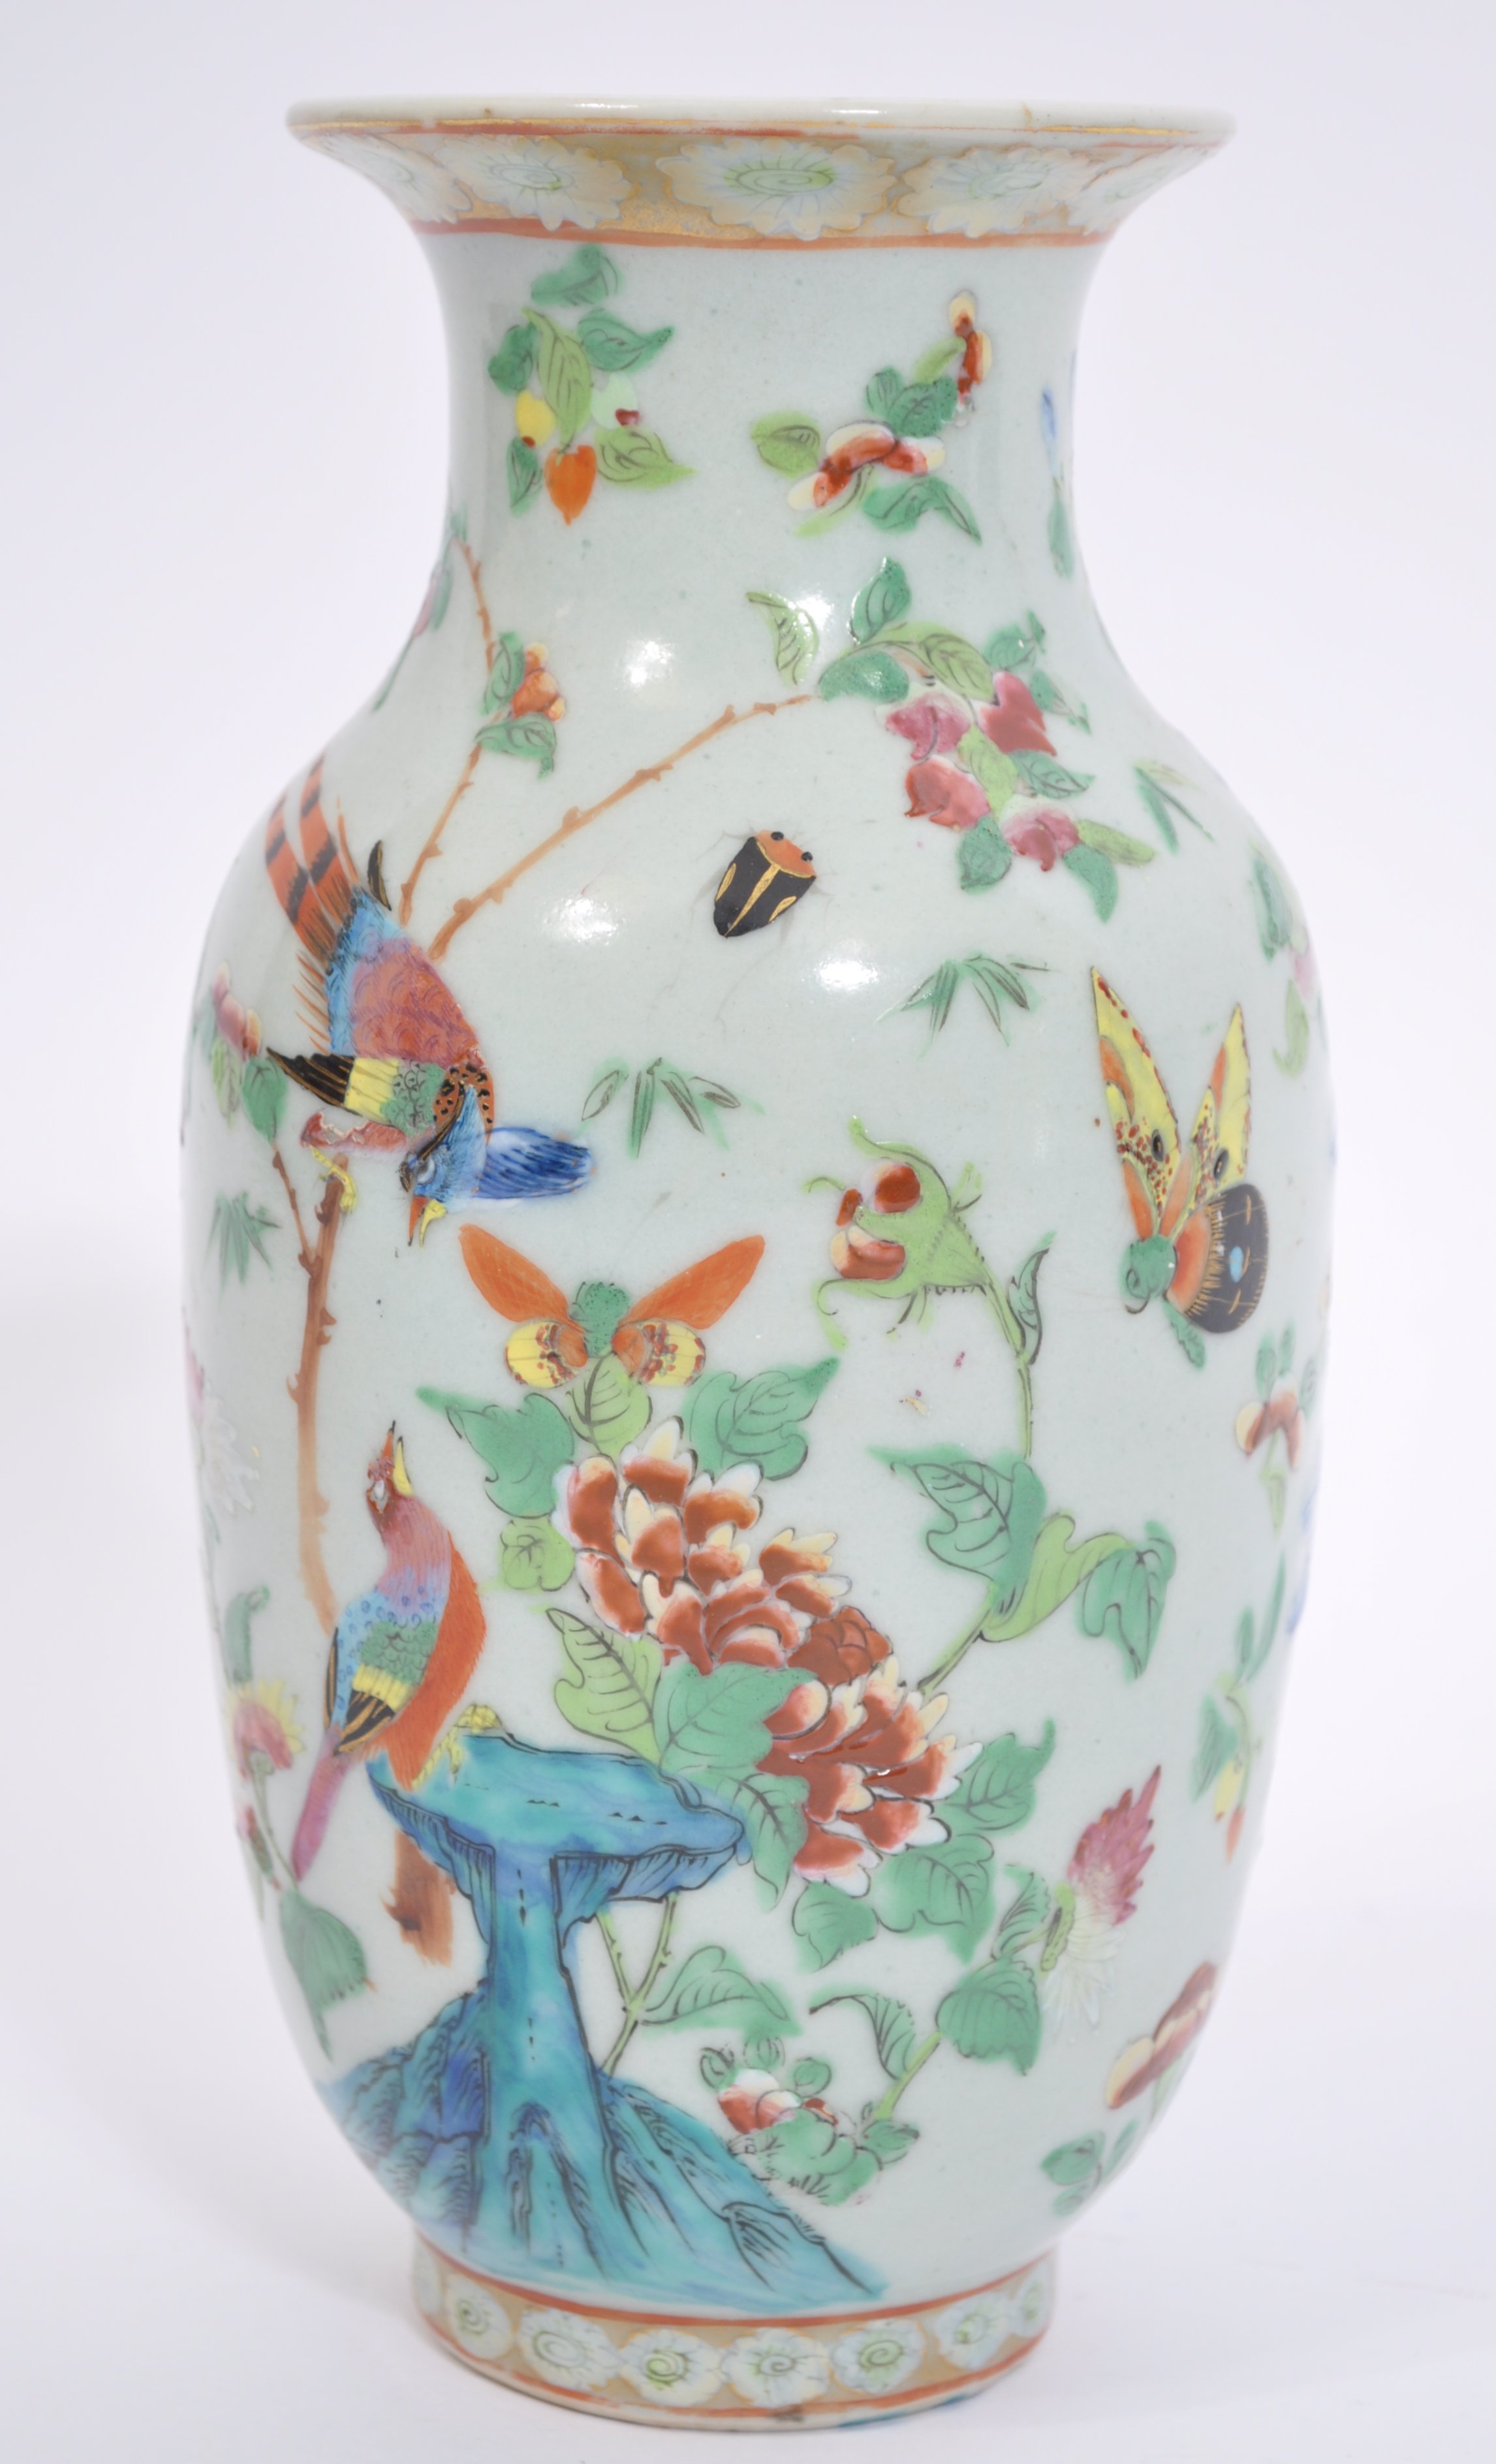 A Chinese 18th / 19th century polychrome famille rose vase with scenes of butterflies and birds - Image 2 of 6